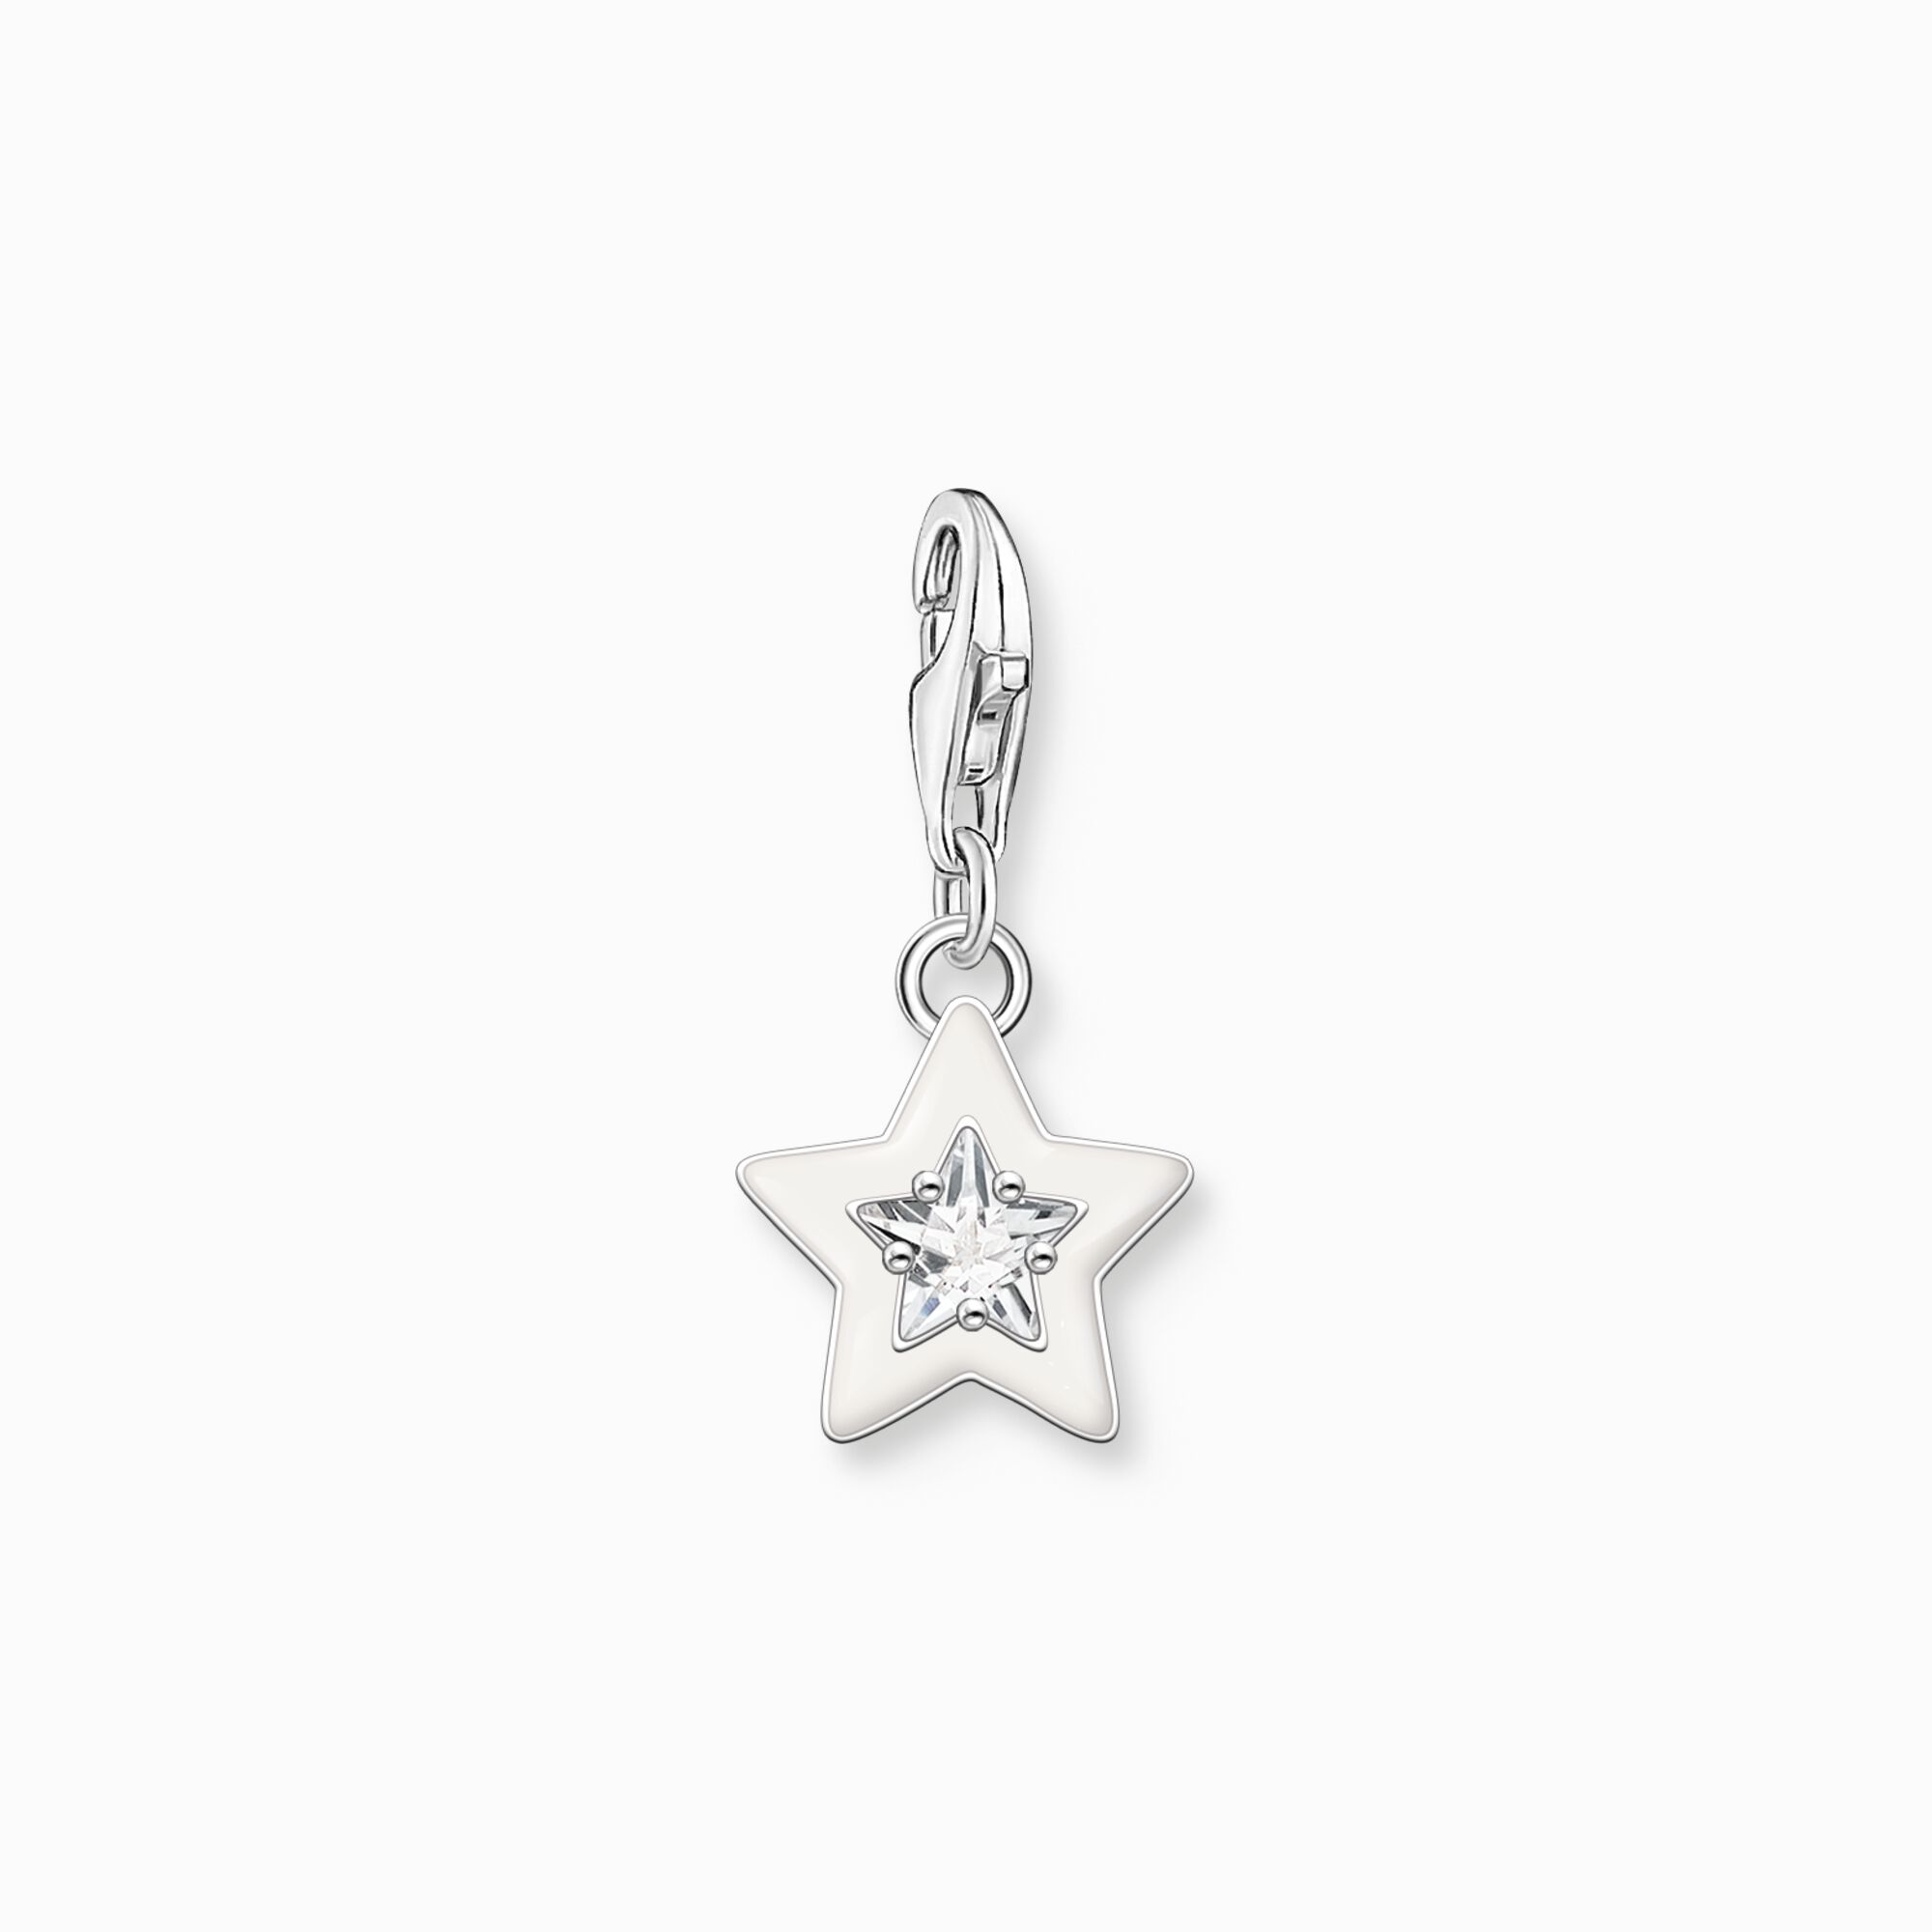 Charm pendant star with white stones and white cold enamel silver from the Charm Club collection in the THOMAS SABO online store